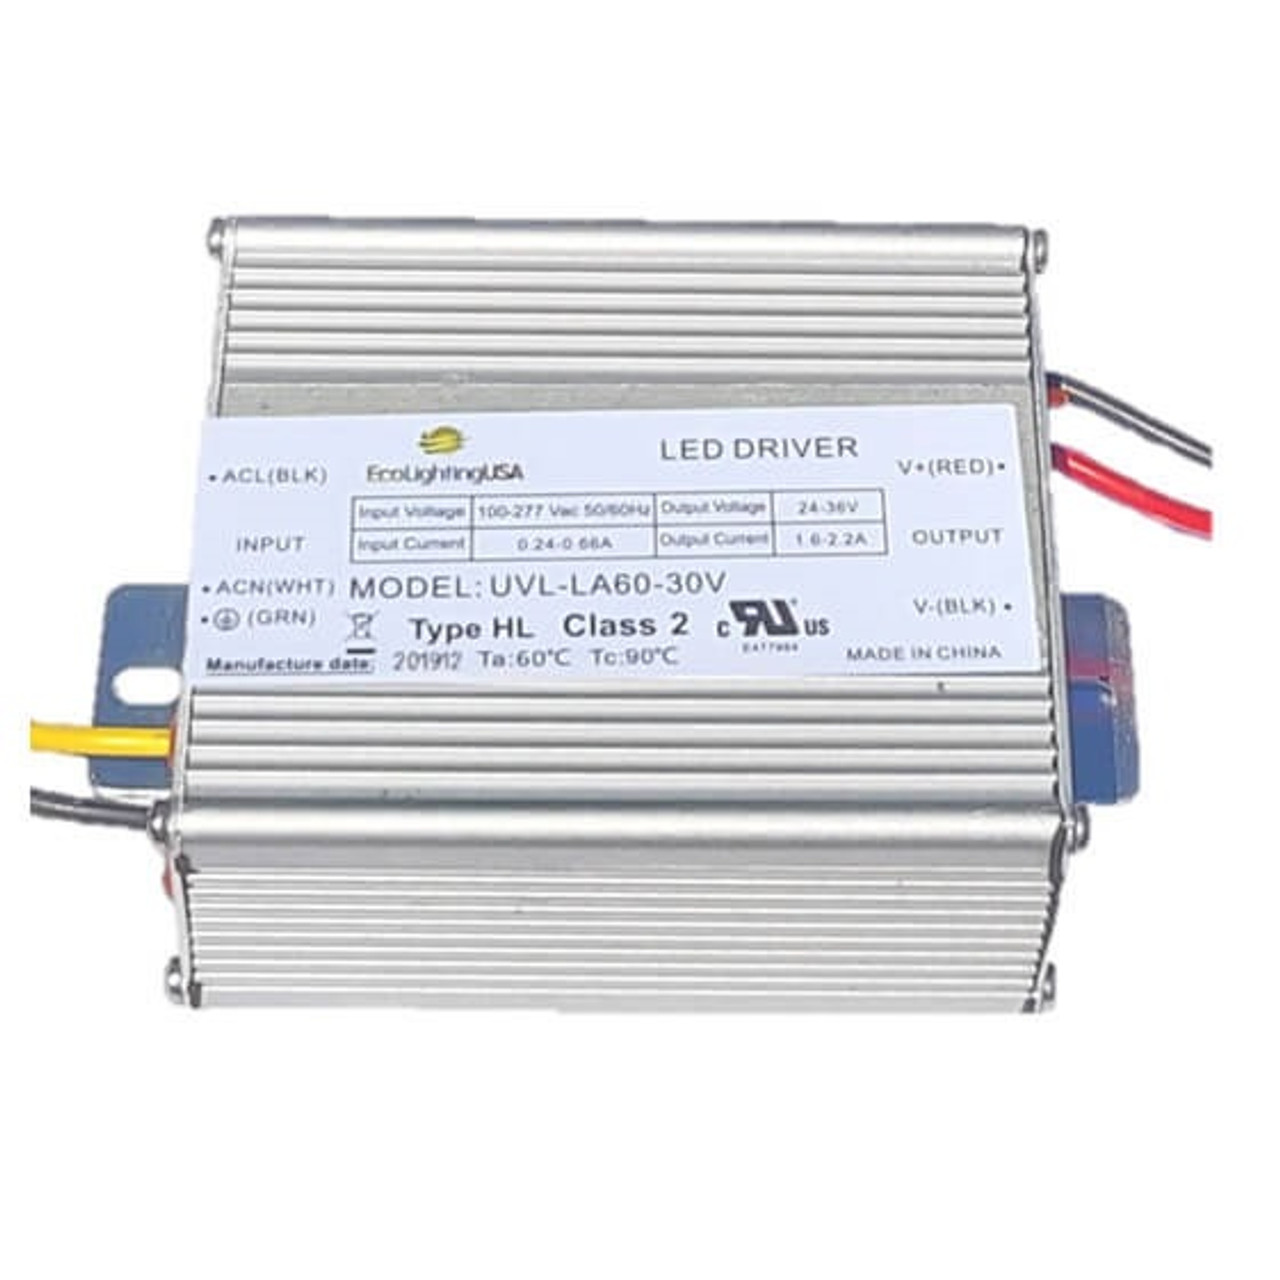 LED Drivers - Voltage converter for current and voltage